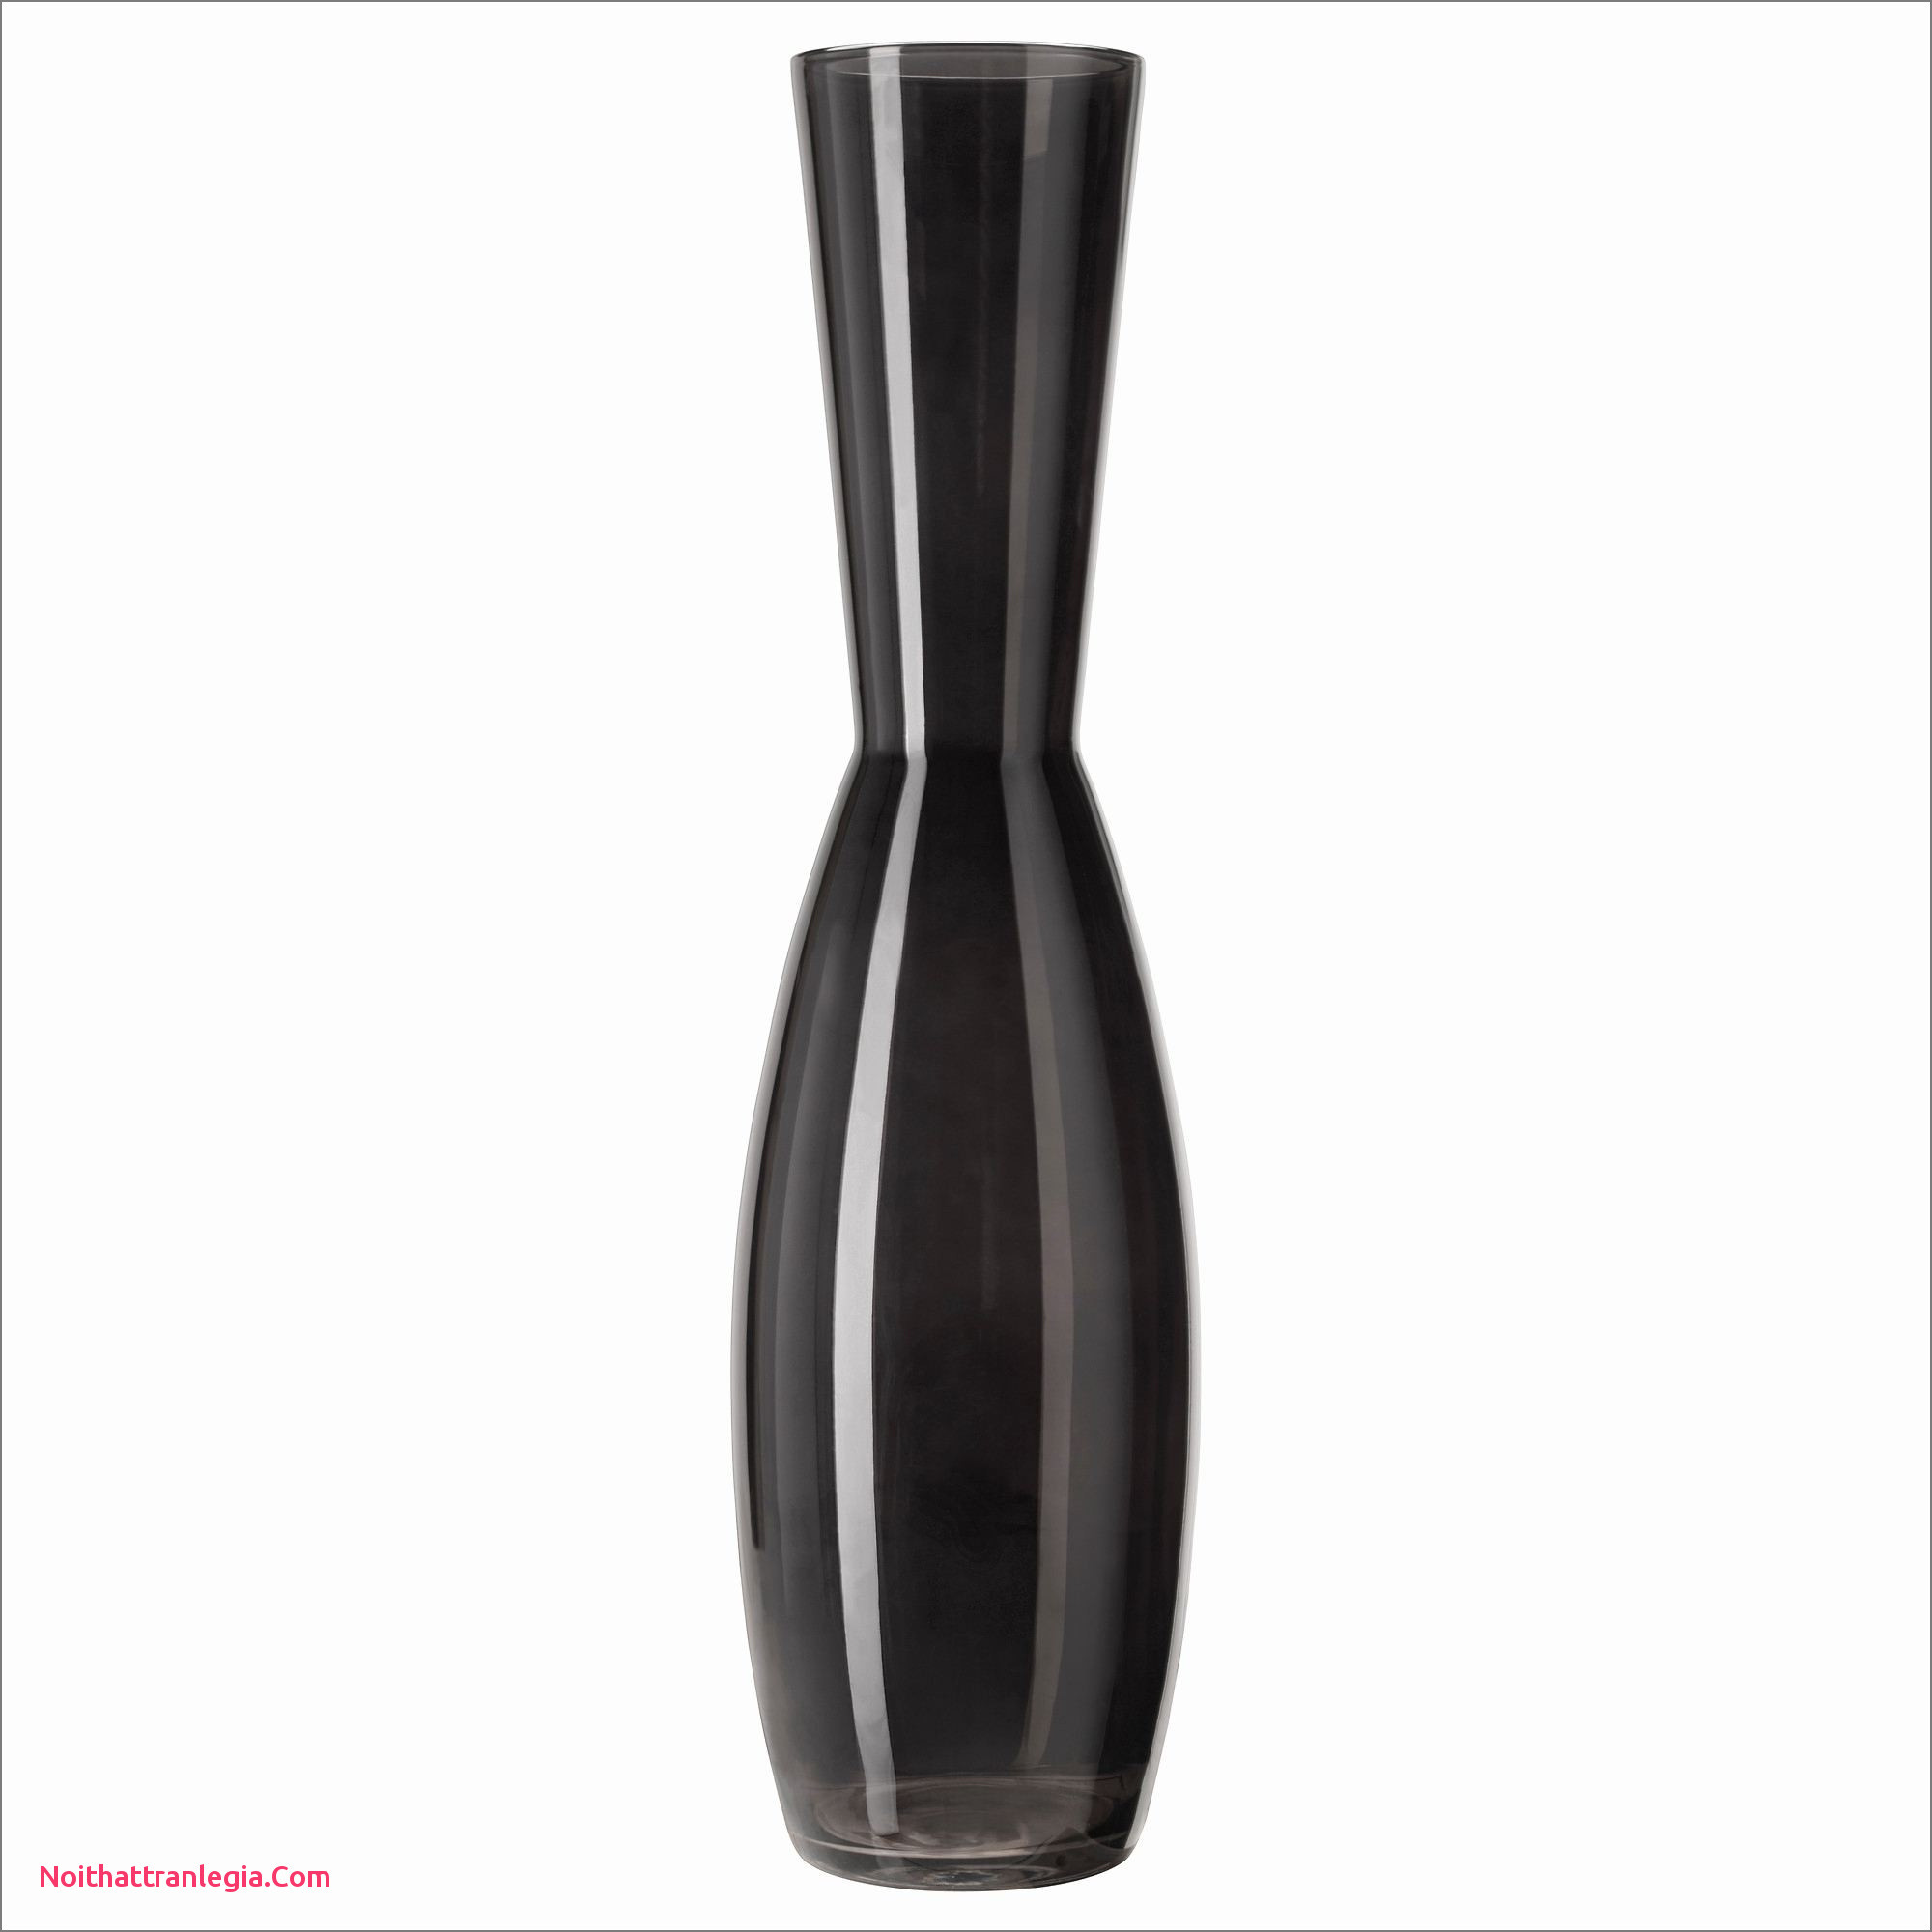 12 Famous Tall Teal Floor Vase 2024 free download tall teal floor vase of 20 large floor vase nz noithattranlegia vases design intended for home design elegant floor vase ikea floor vase ikea new ikea krabb mirror ideas awesome